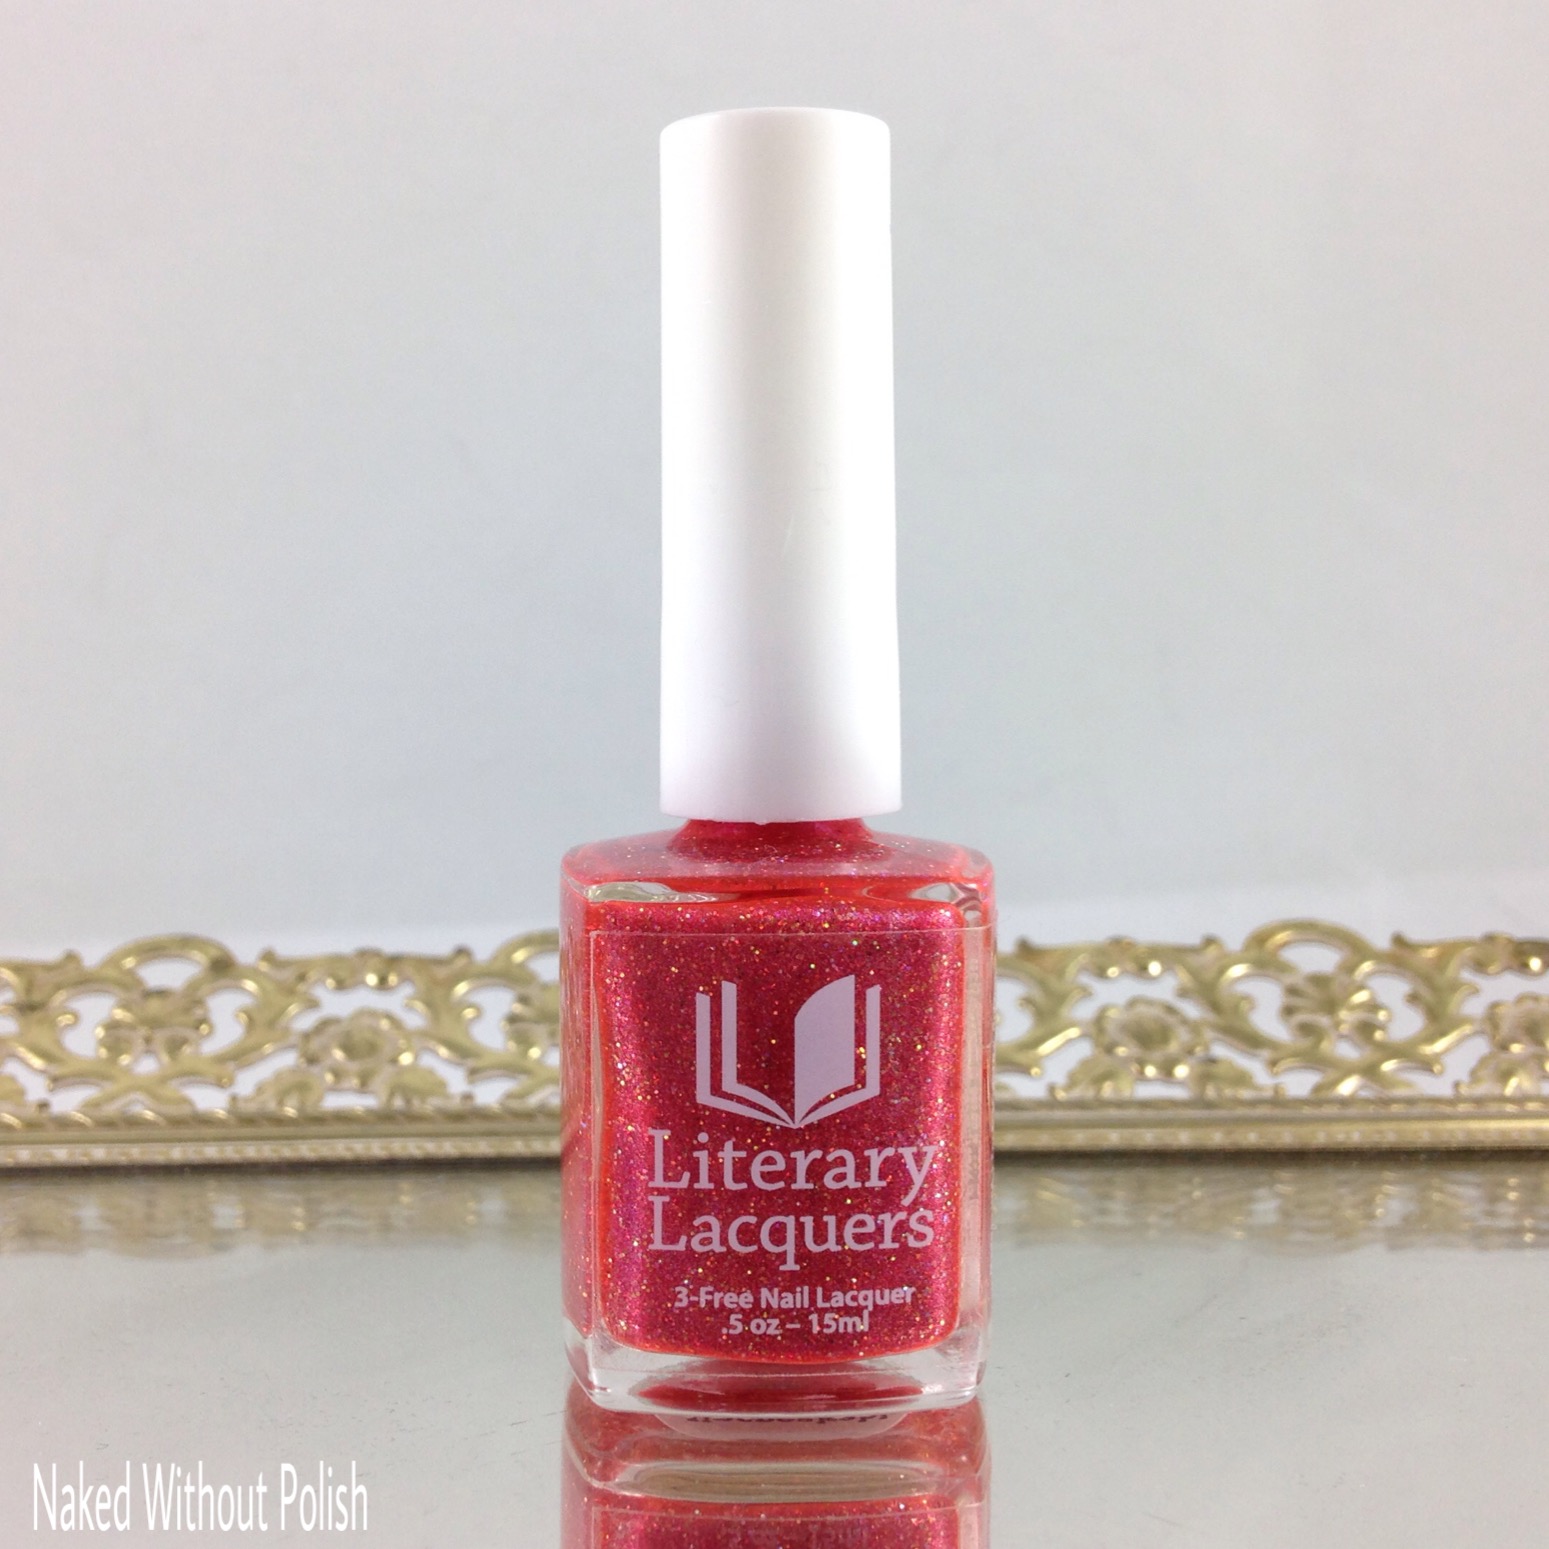 Literary-Lacquers-Unspeakably-Desirable-2